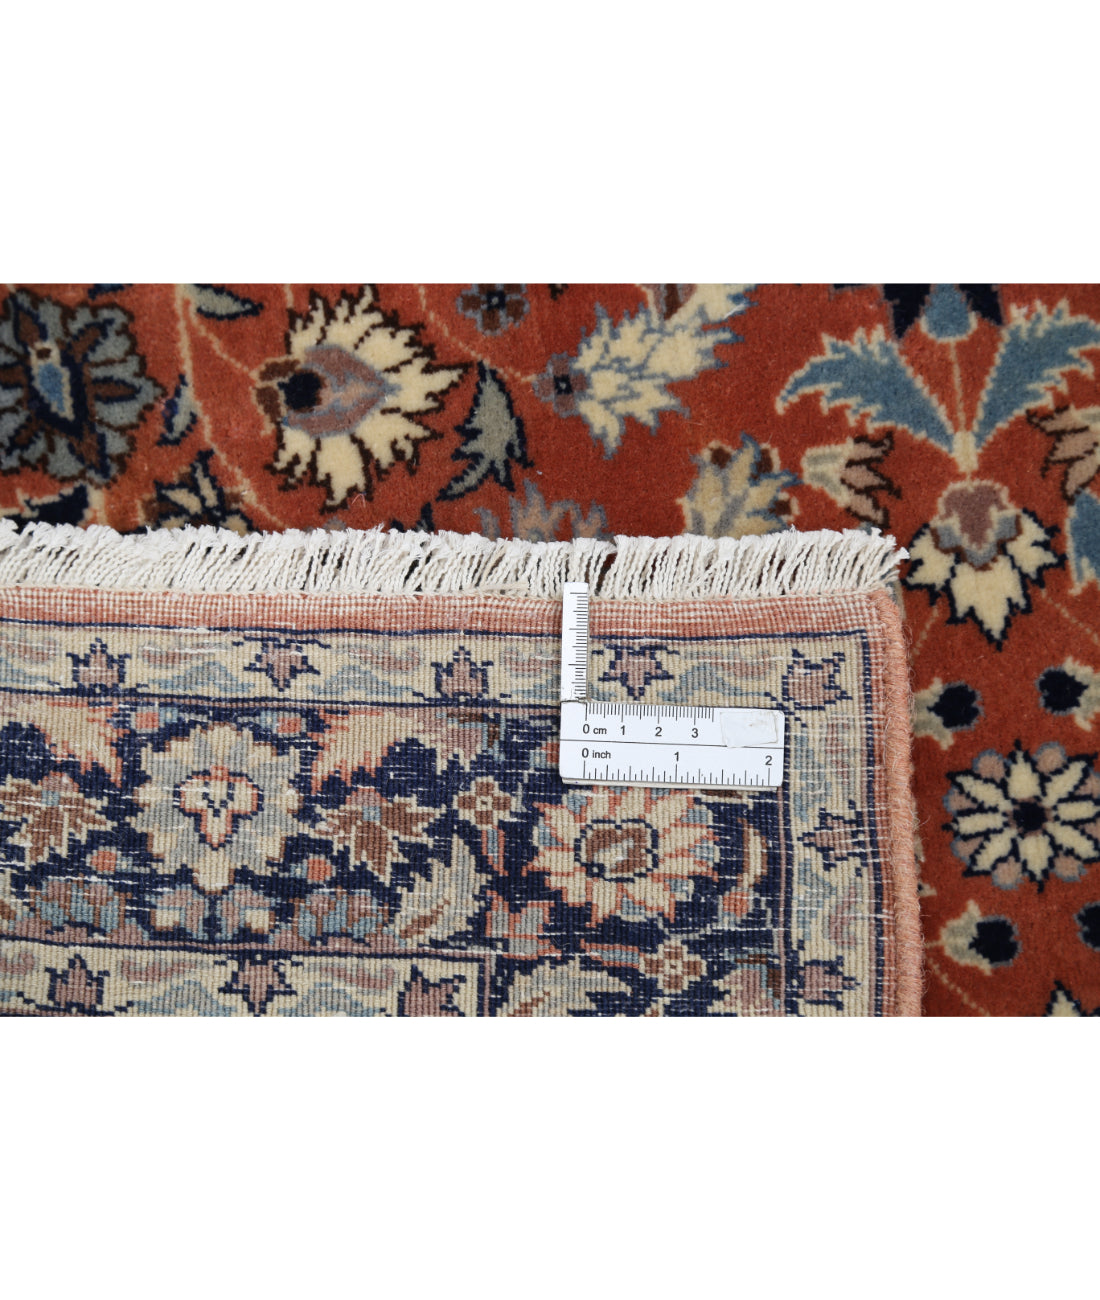 Heritage 2' 9" X 13' 3" Hand-Knotted Wool Rug 2' 9" X 13' 3" (84 X 404) / Rust / Blue